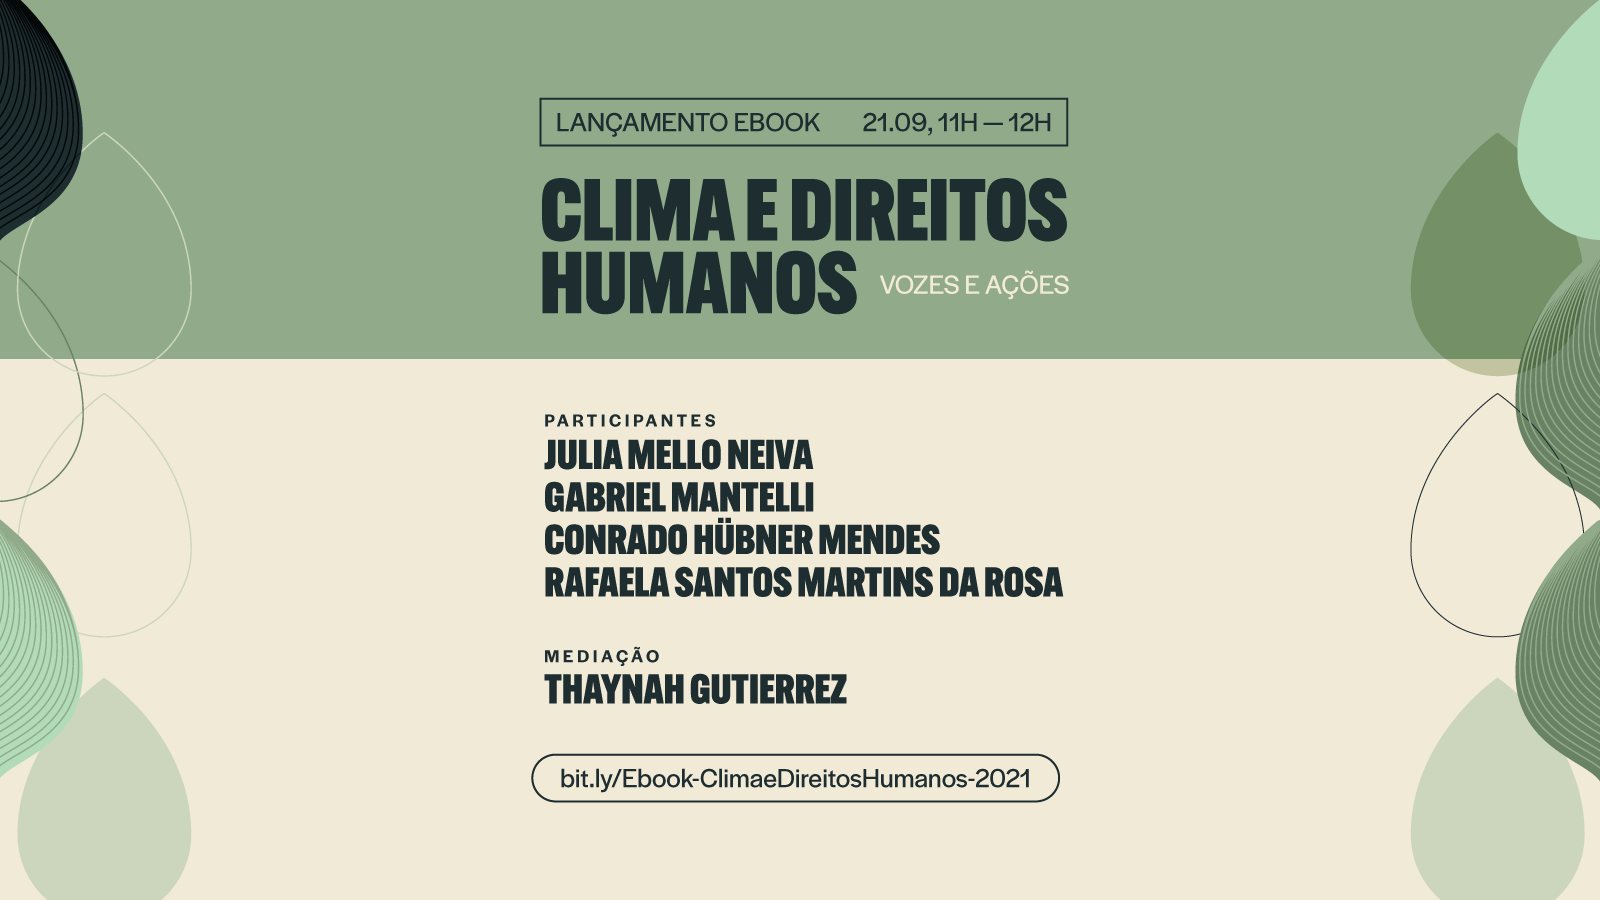 Conectas launches an e-book on climate and human rights